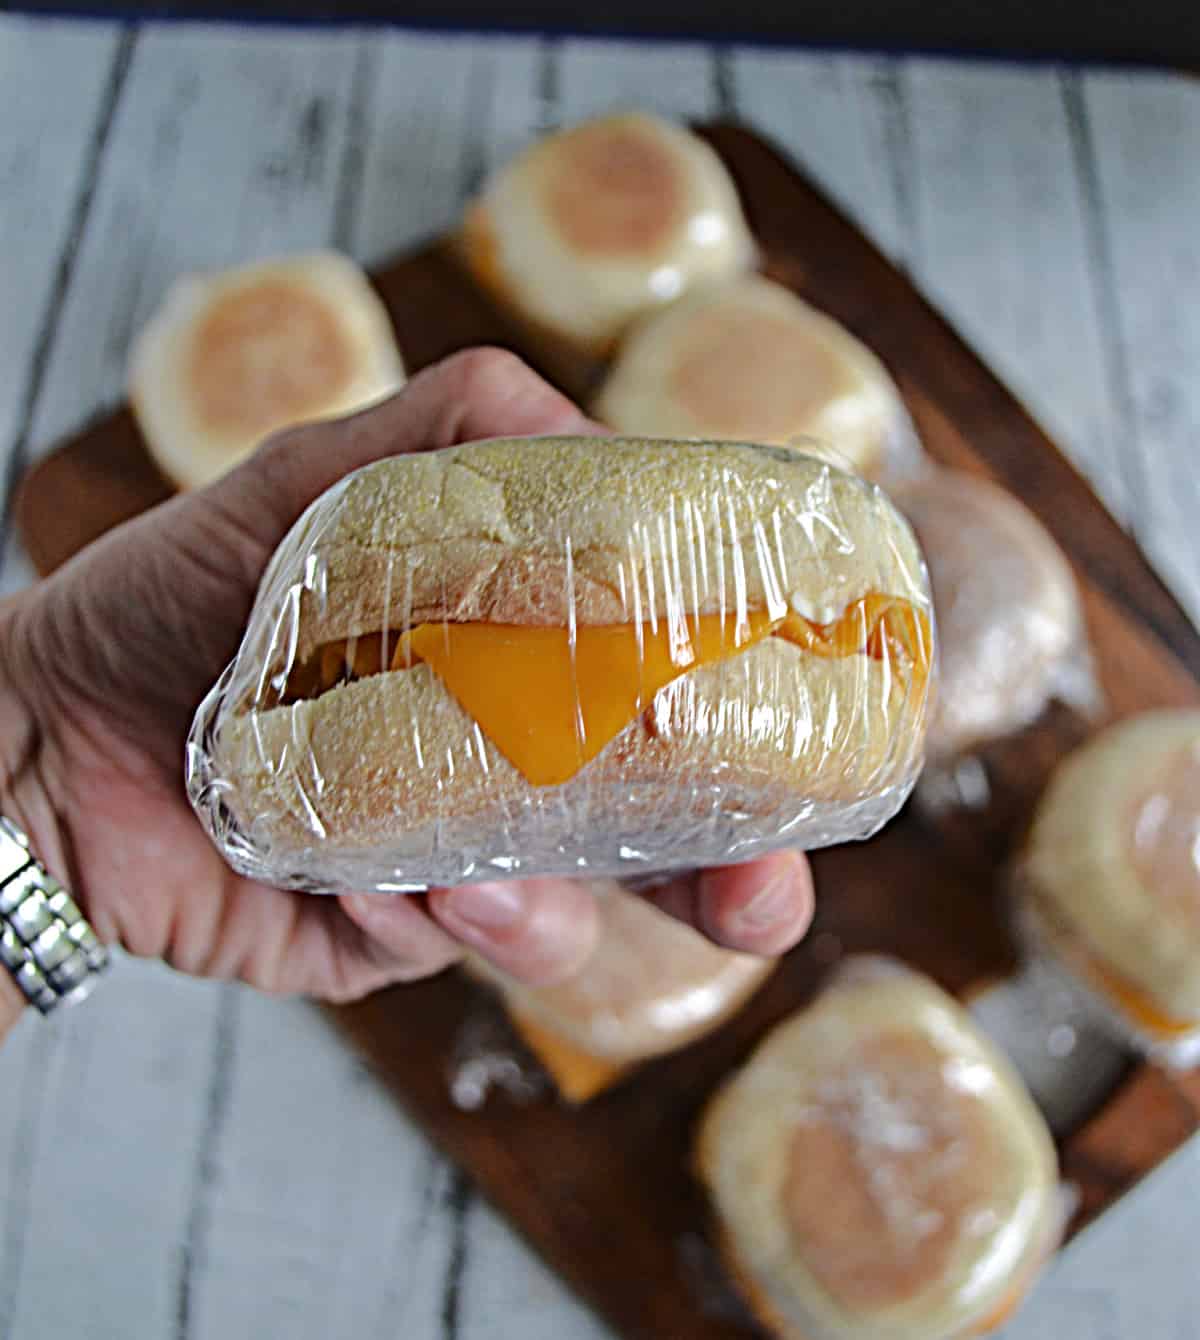 A close up of a hand holding a plastic wrapped sausage and cheese breakfast sandwich.